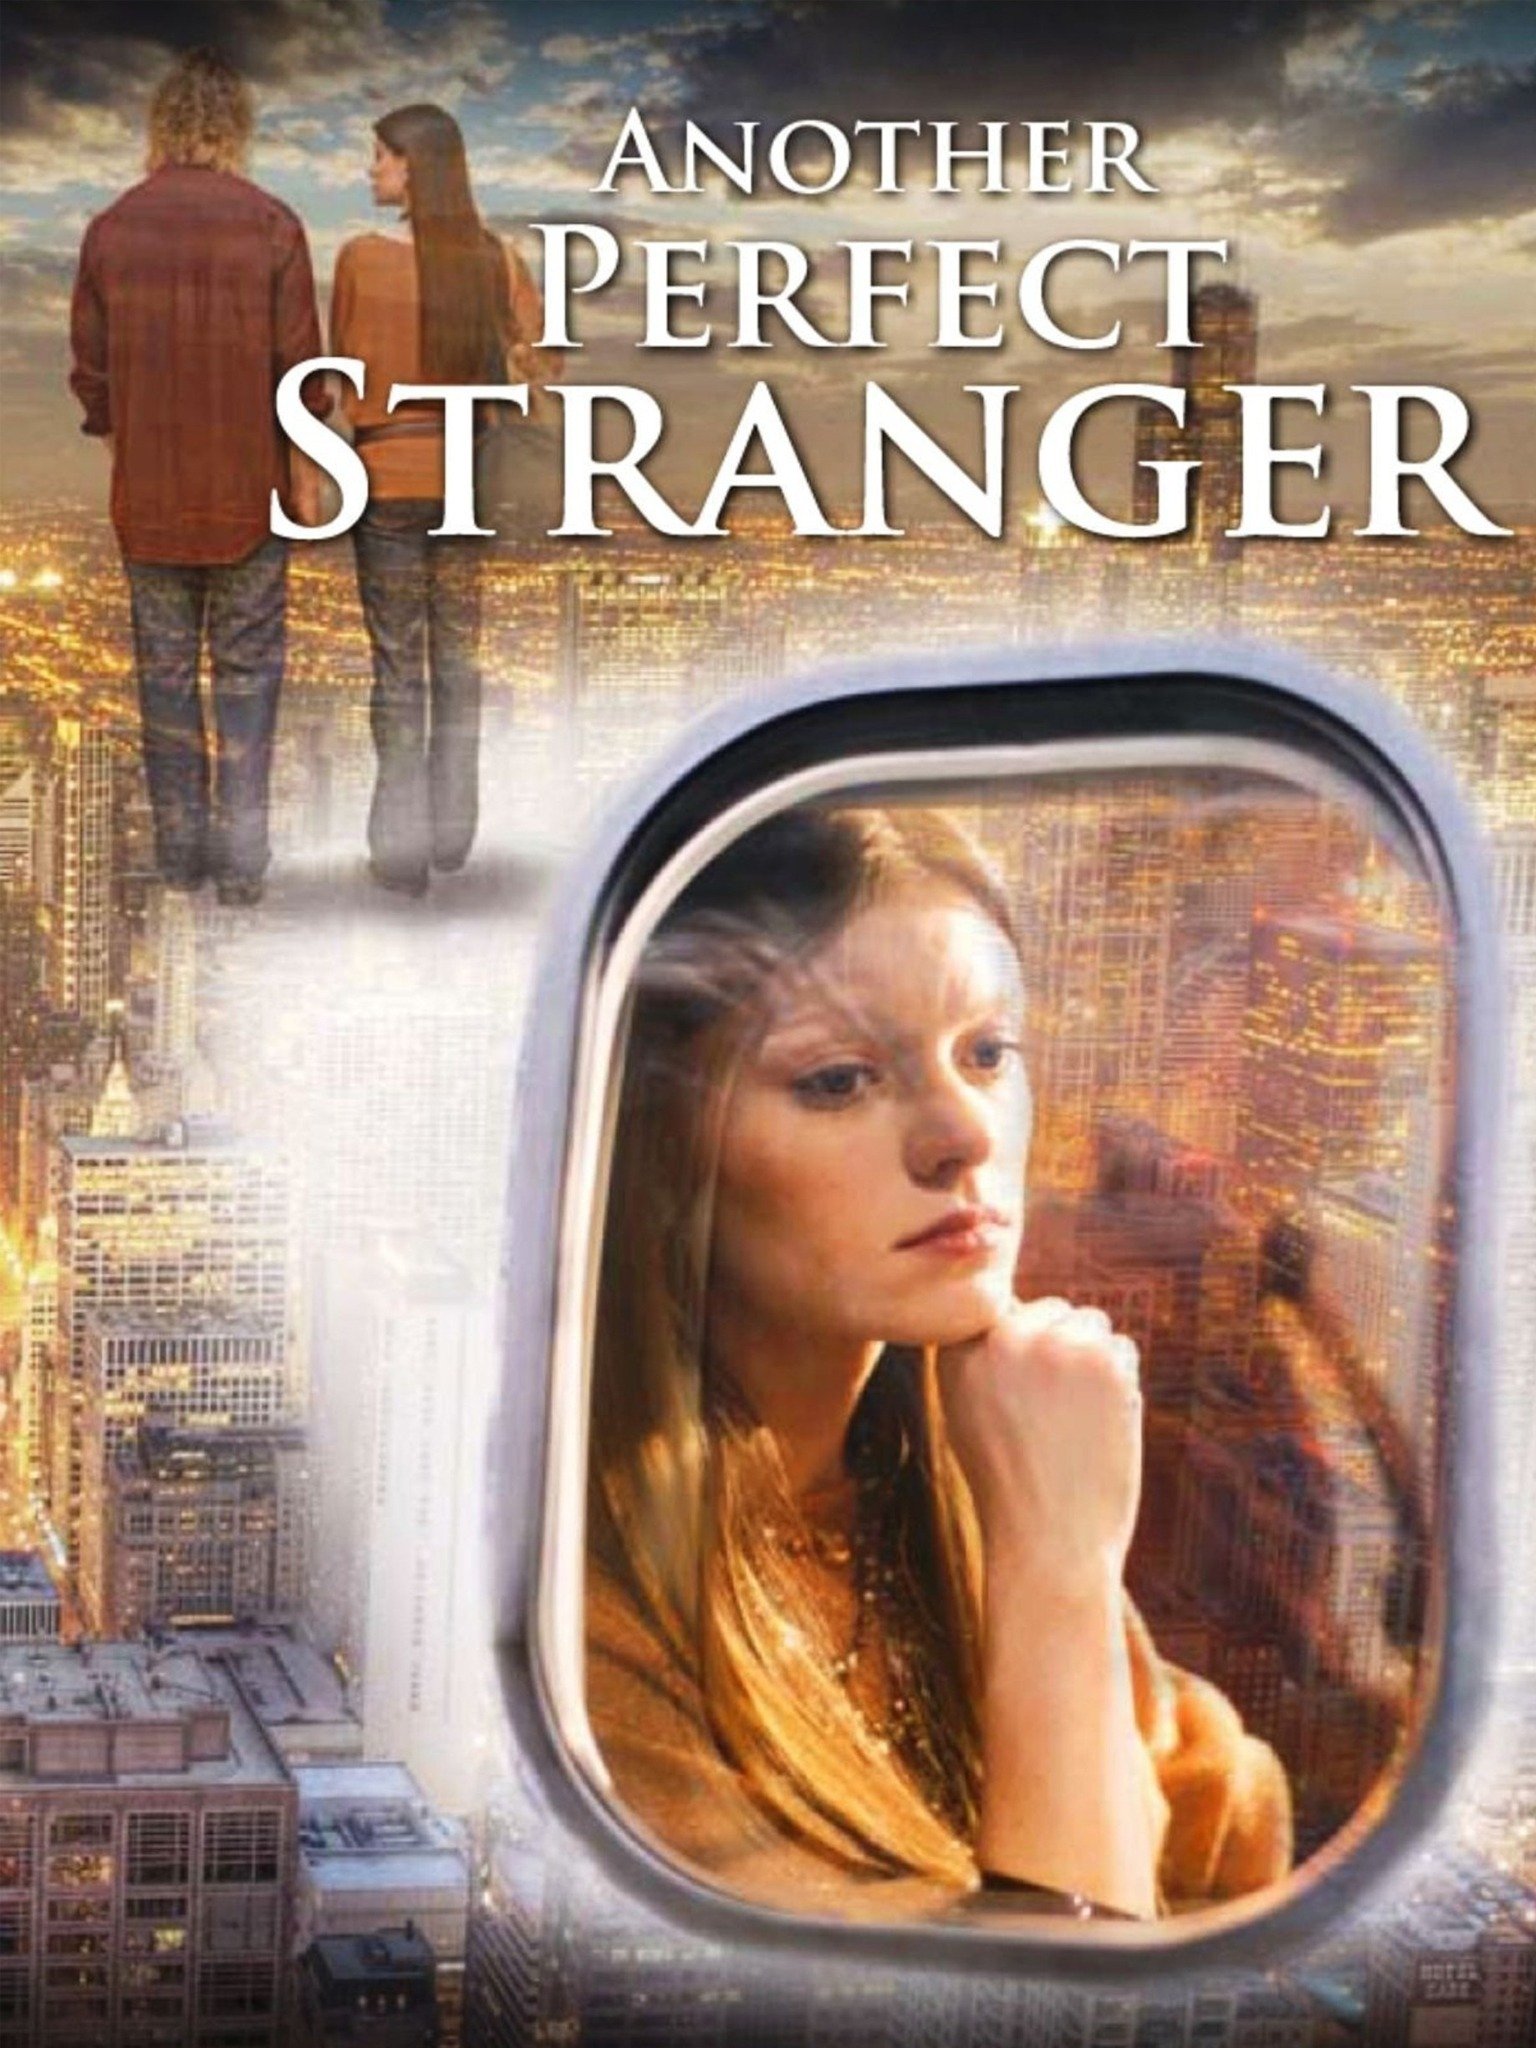 Another Perfect Stranger (2007) photo 9